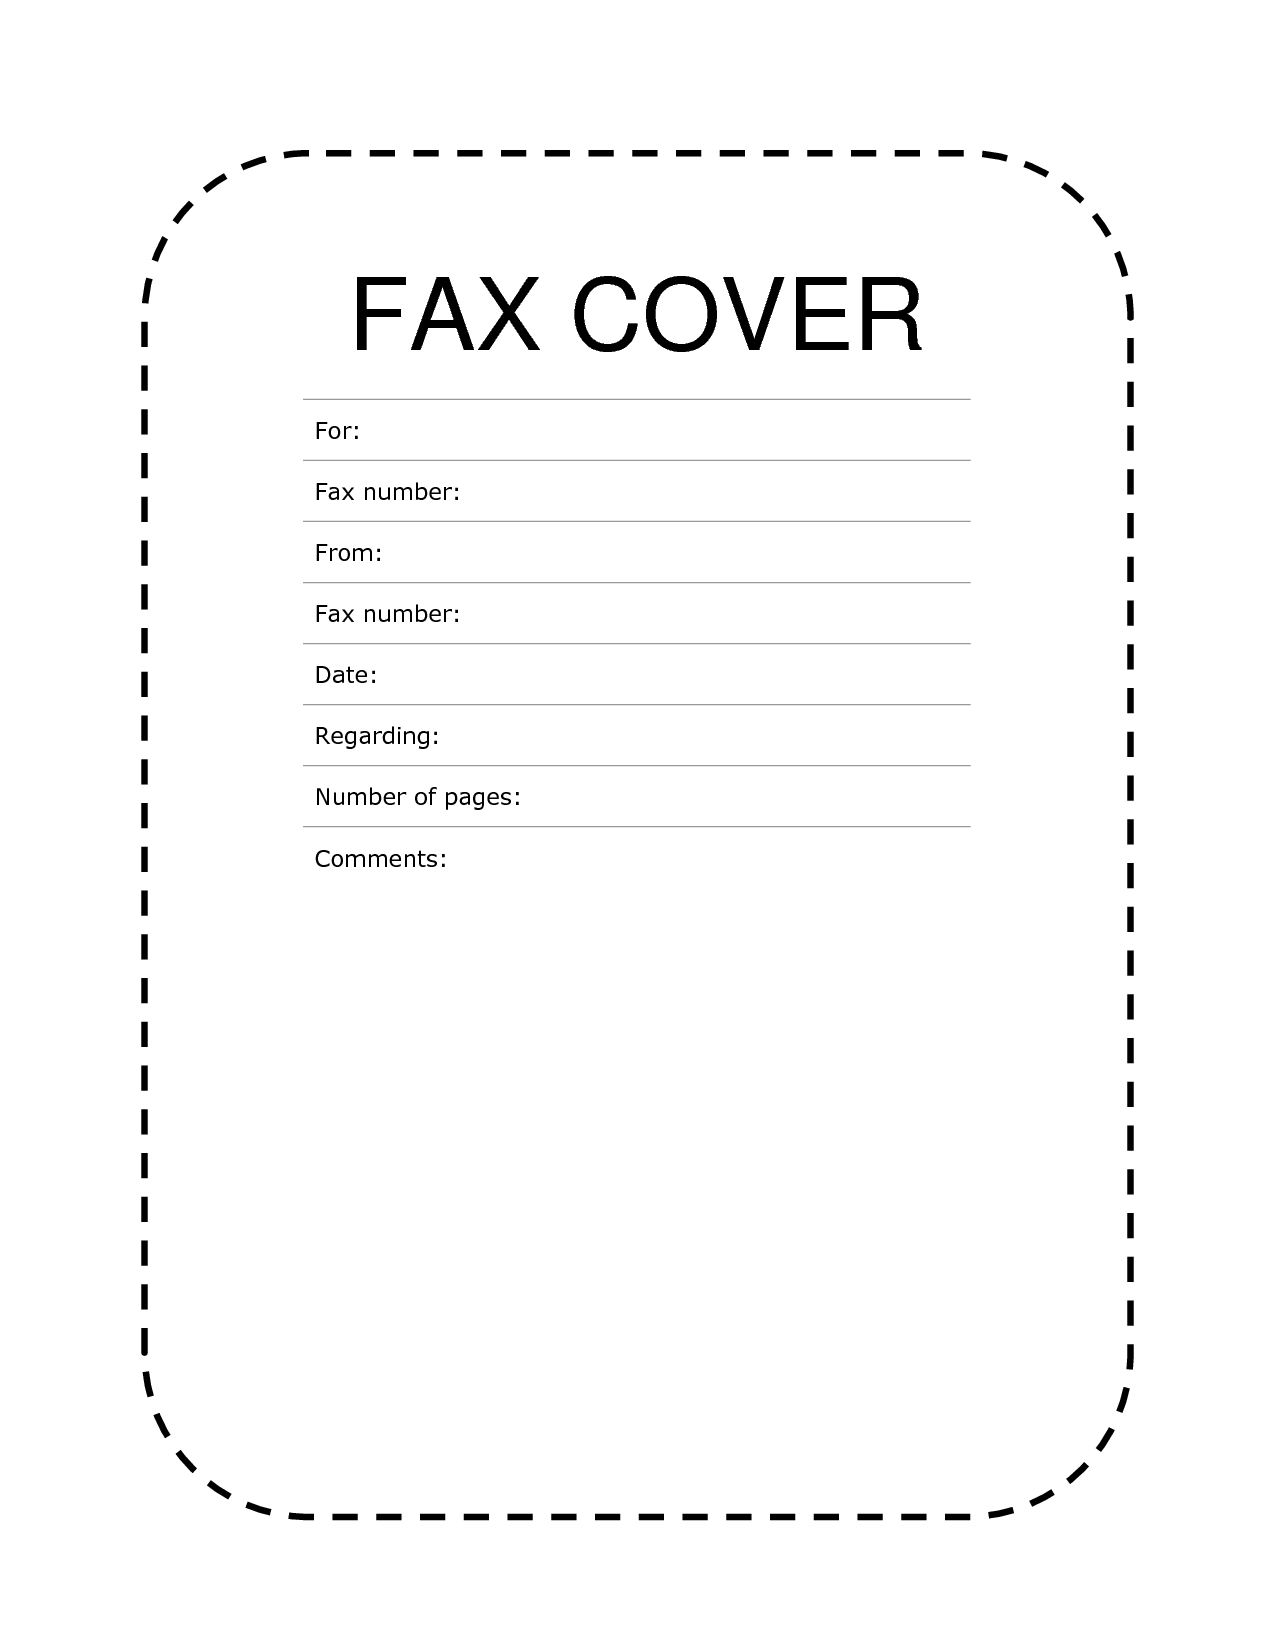 Free Fax Cover Sheet Template Format Example Pdf Printable | Fax - Free Printable Cover Letter For Fax